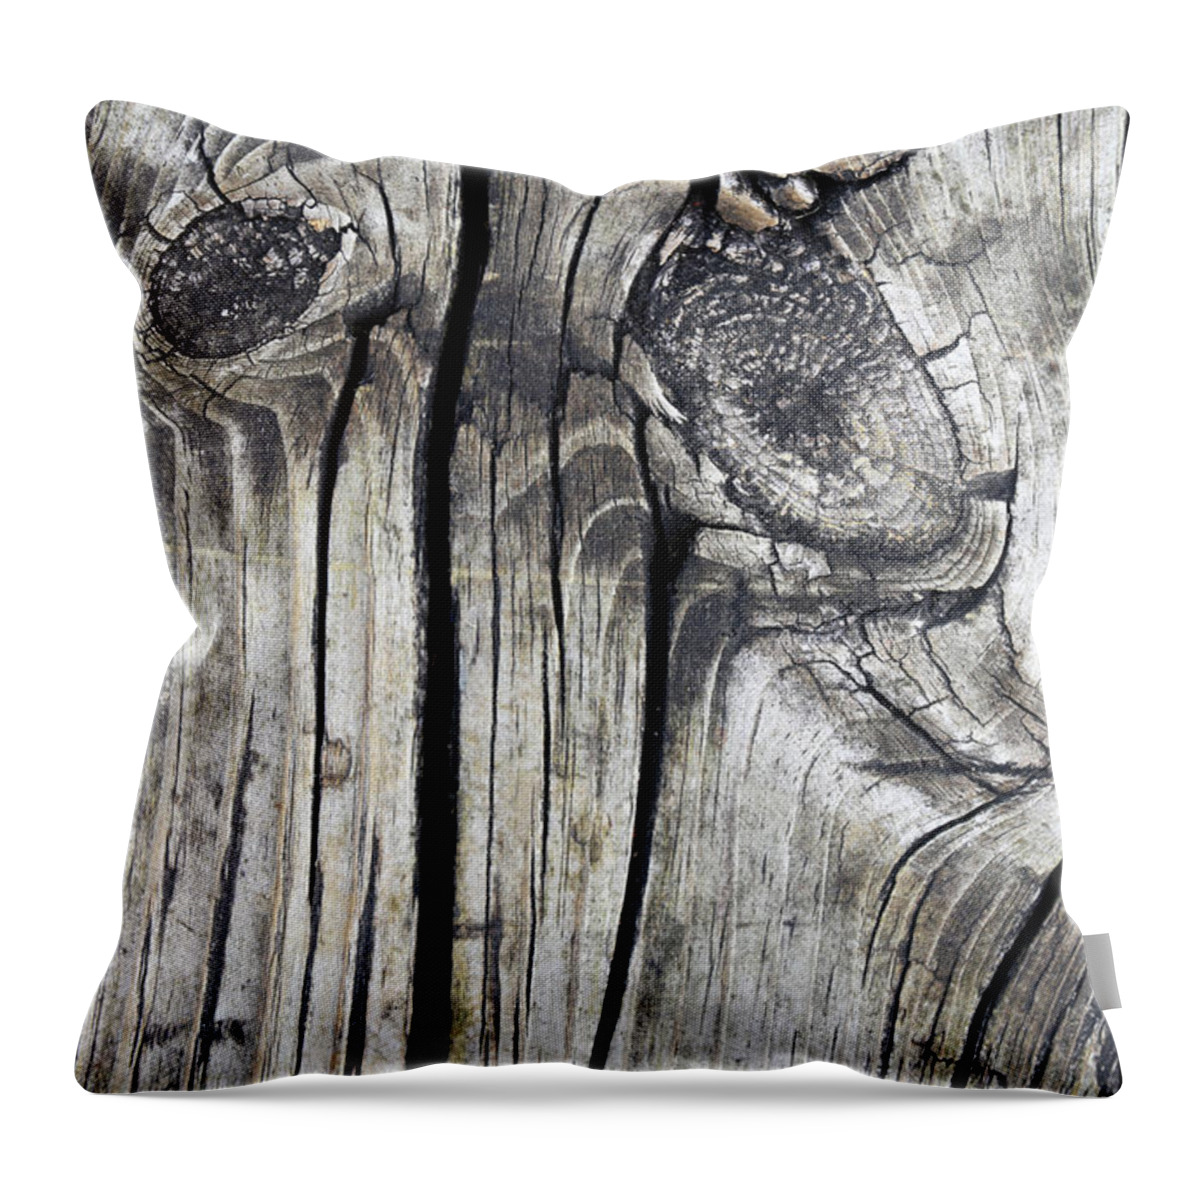 Wood Throw Pillow featuring the photograph Worried by Mary Bedy